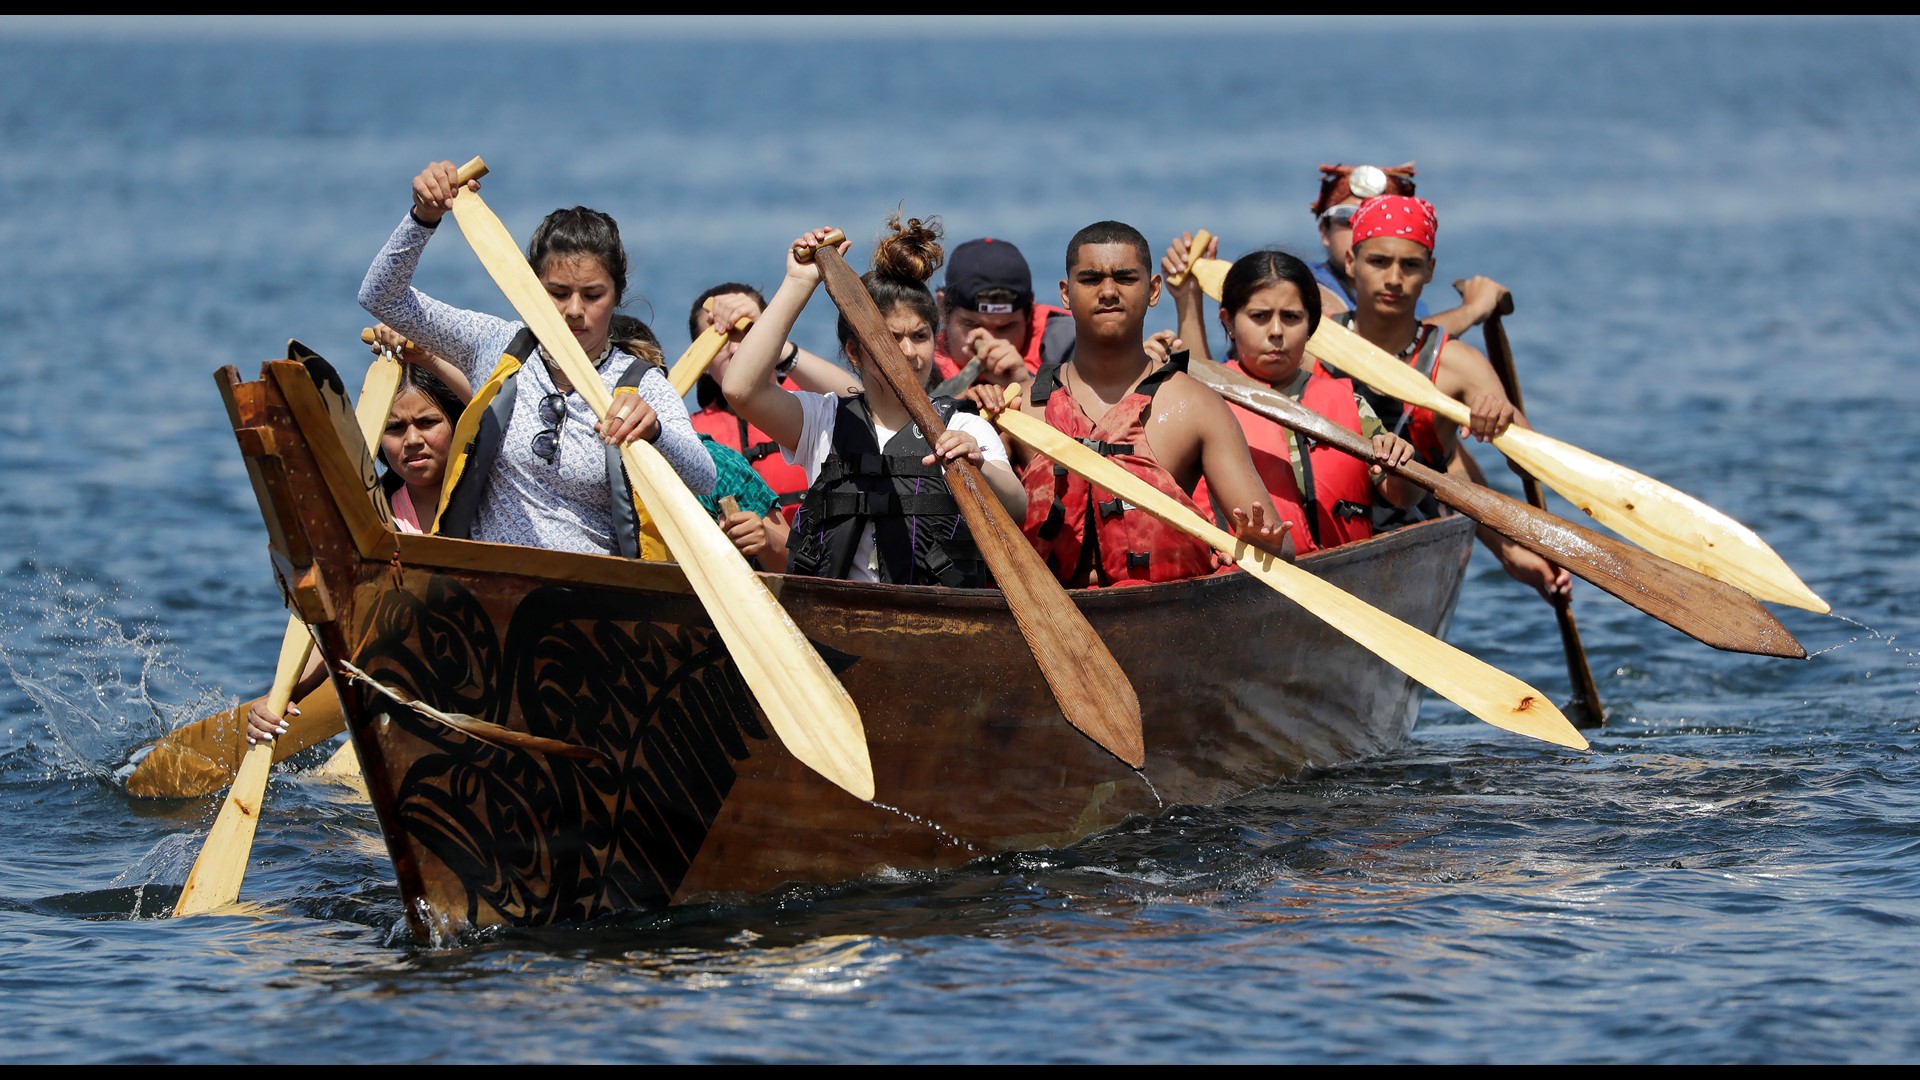 Tribes are rowing up the coast